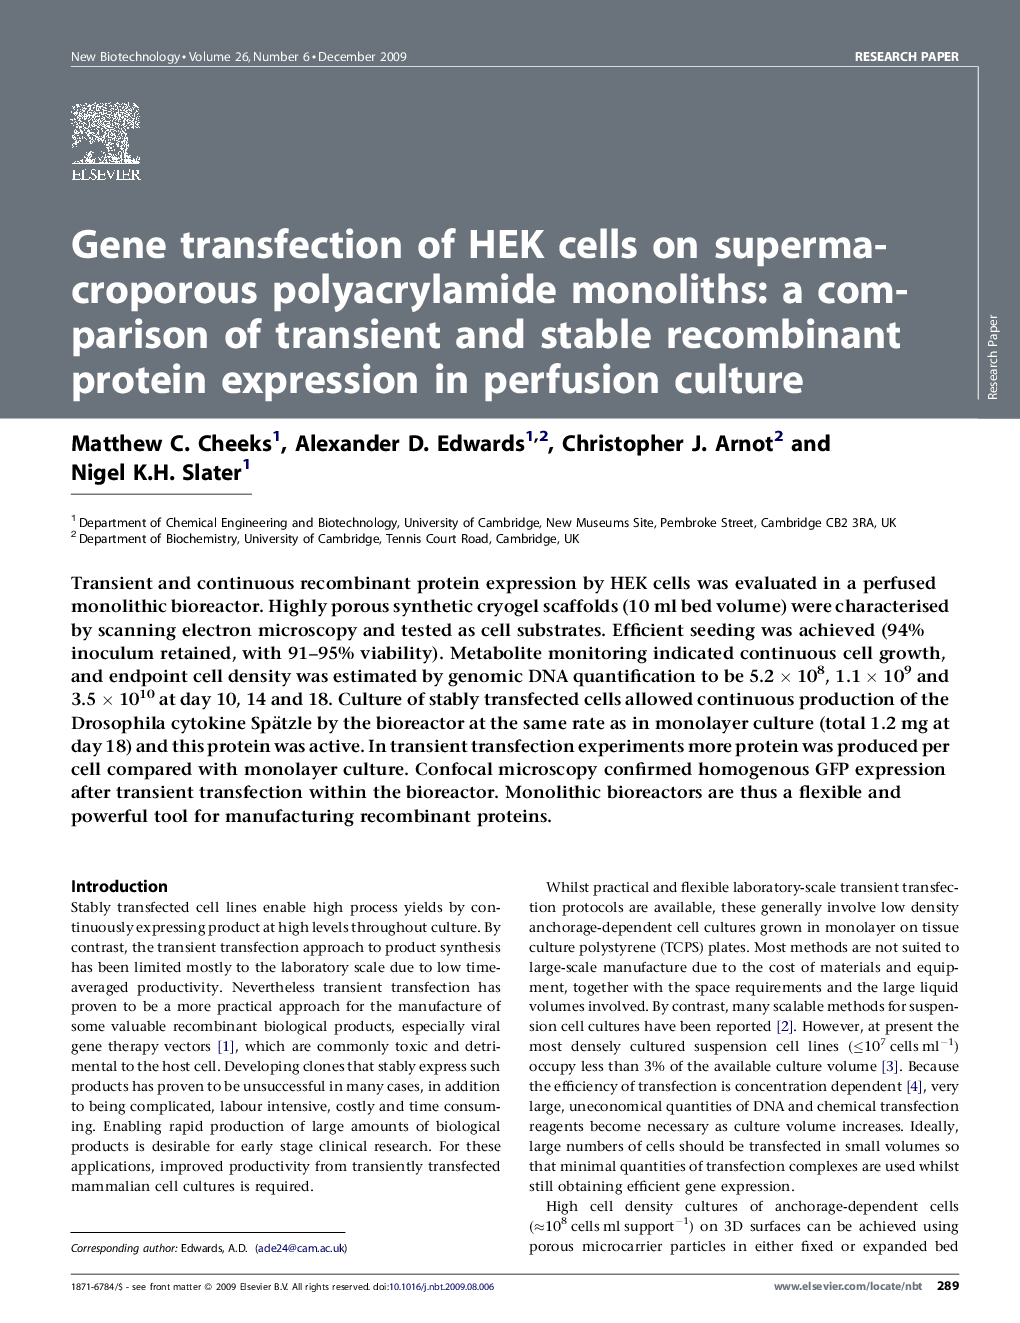 Gene transfection of HEK cells on supermacroporous polyacrylamide monoliths: a comparison of transient and stable recombinant protein expression in perfusion culture